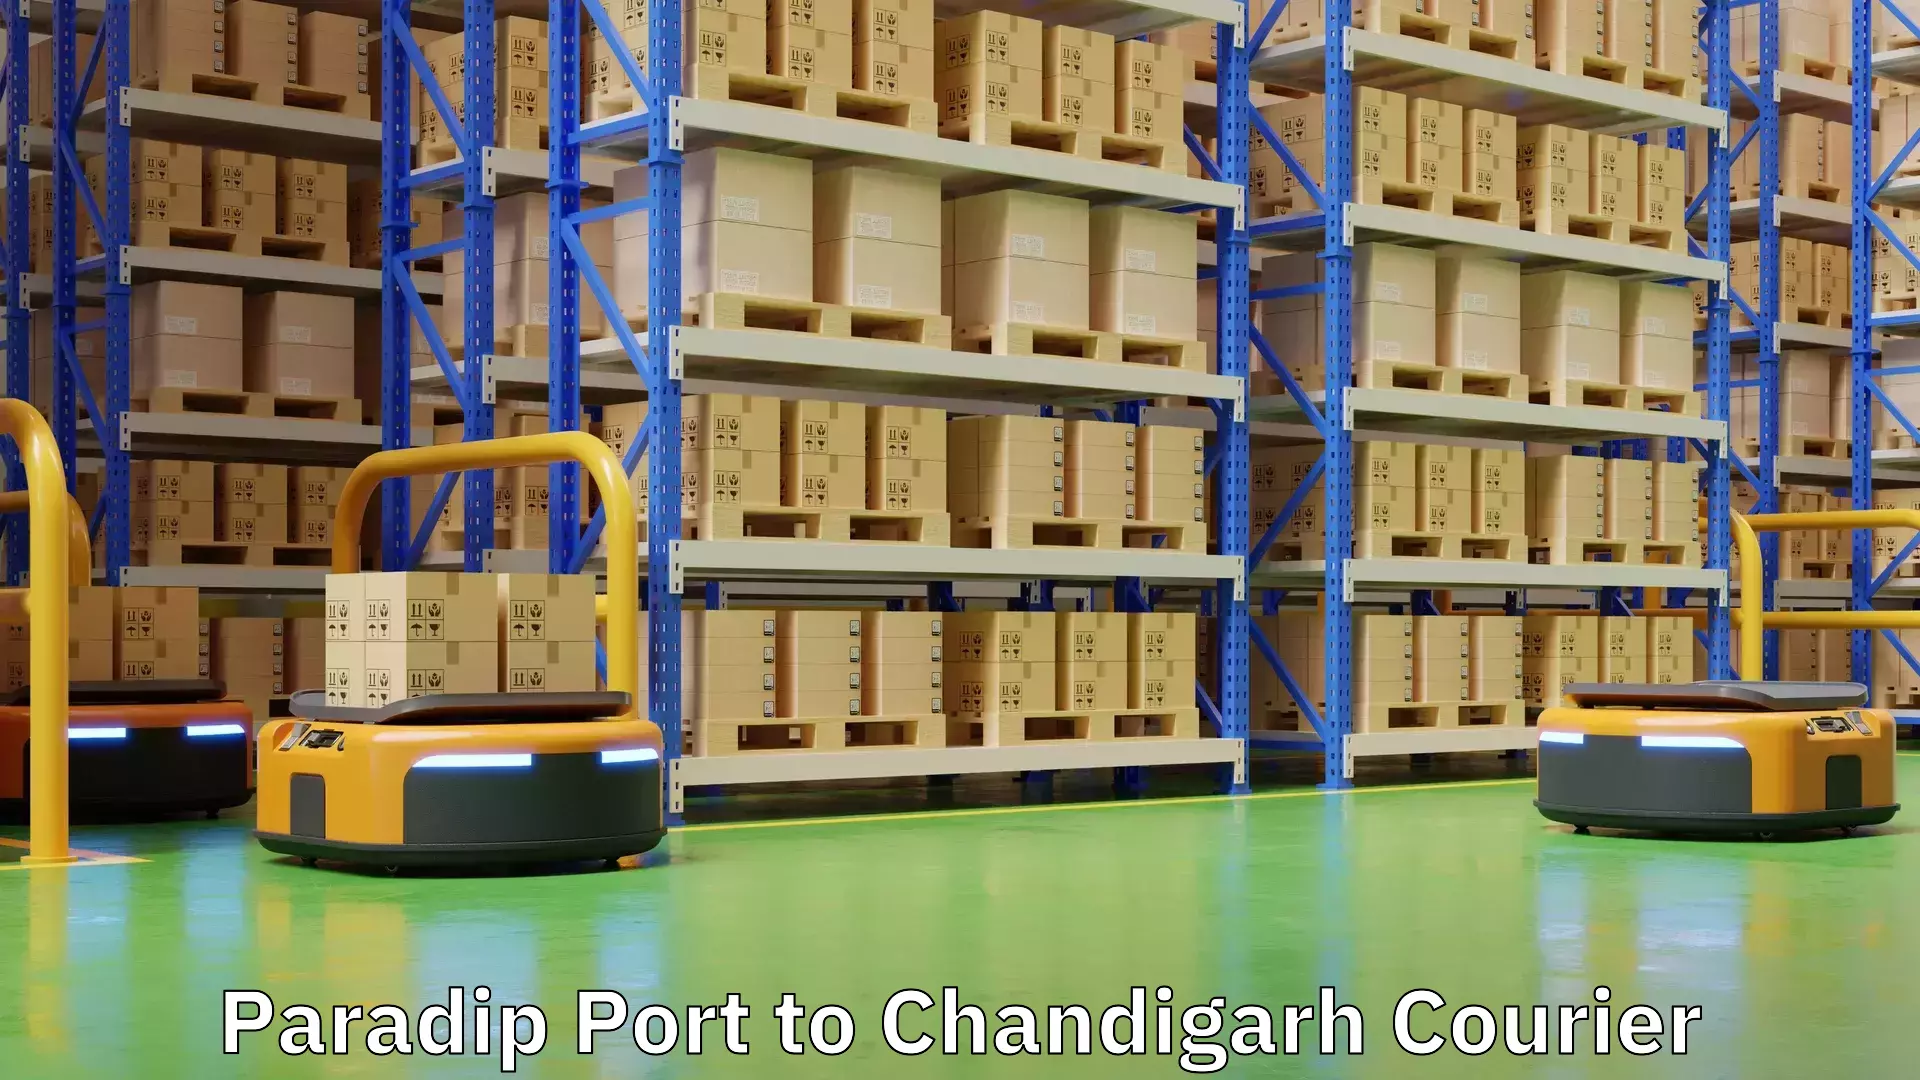 Short distance delivery Paradip Port to Chandigarh